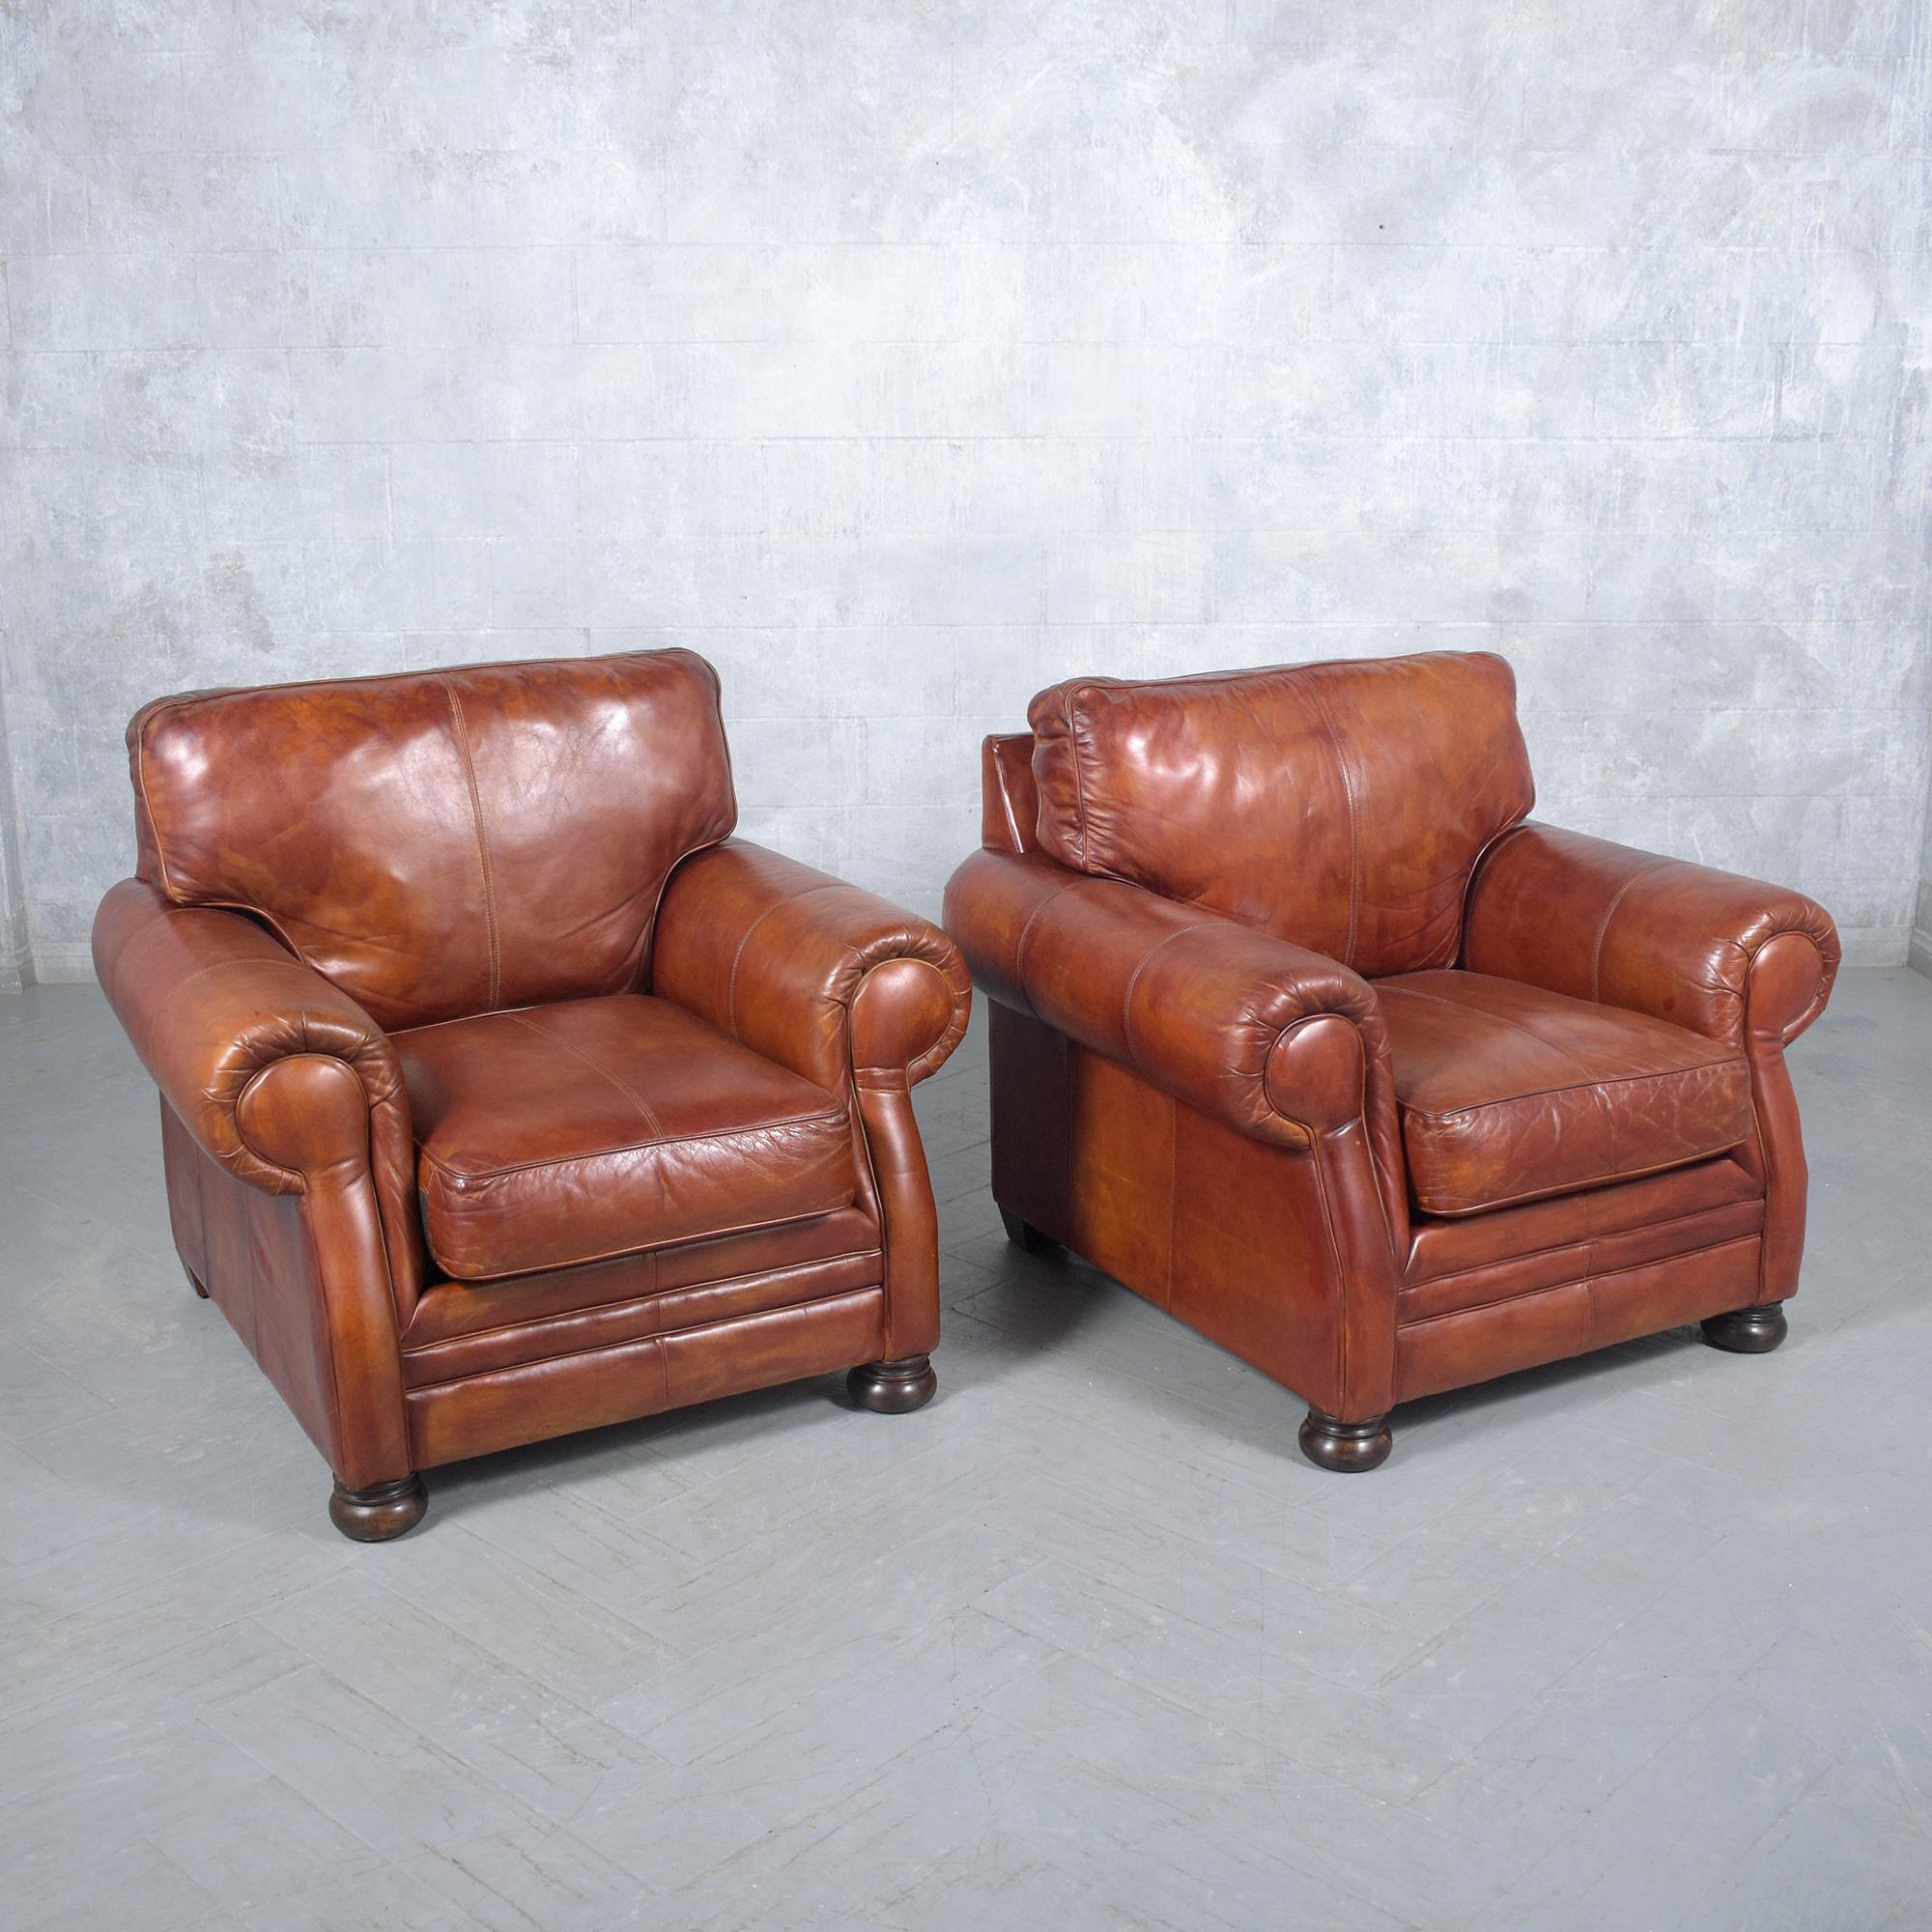 Restored Vintage Leather Armchairs in Cognac Brown with Carved Bun Legs For Sale 2